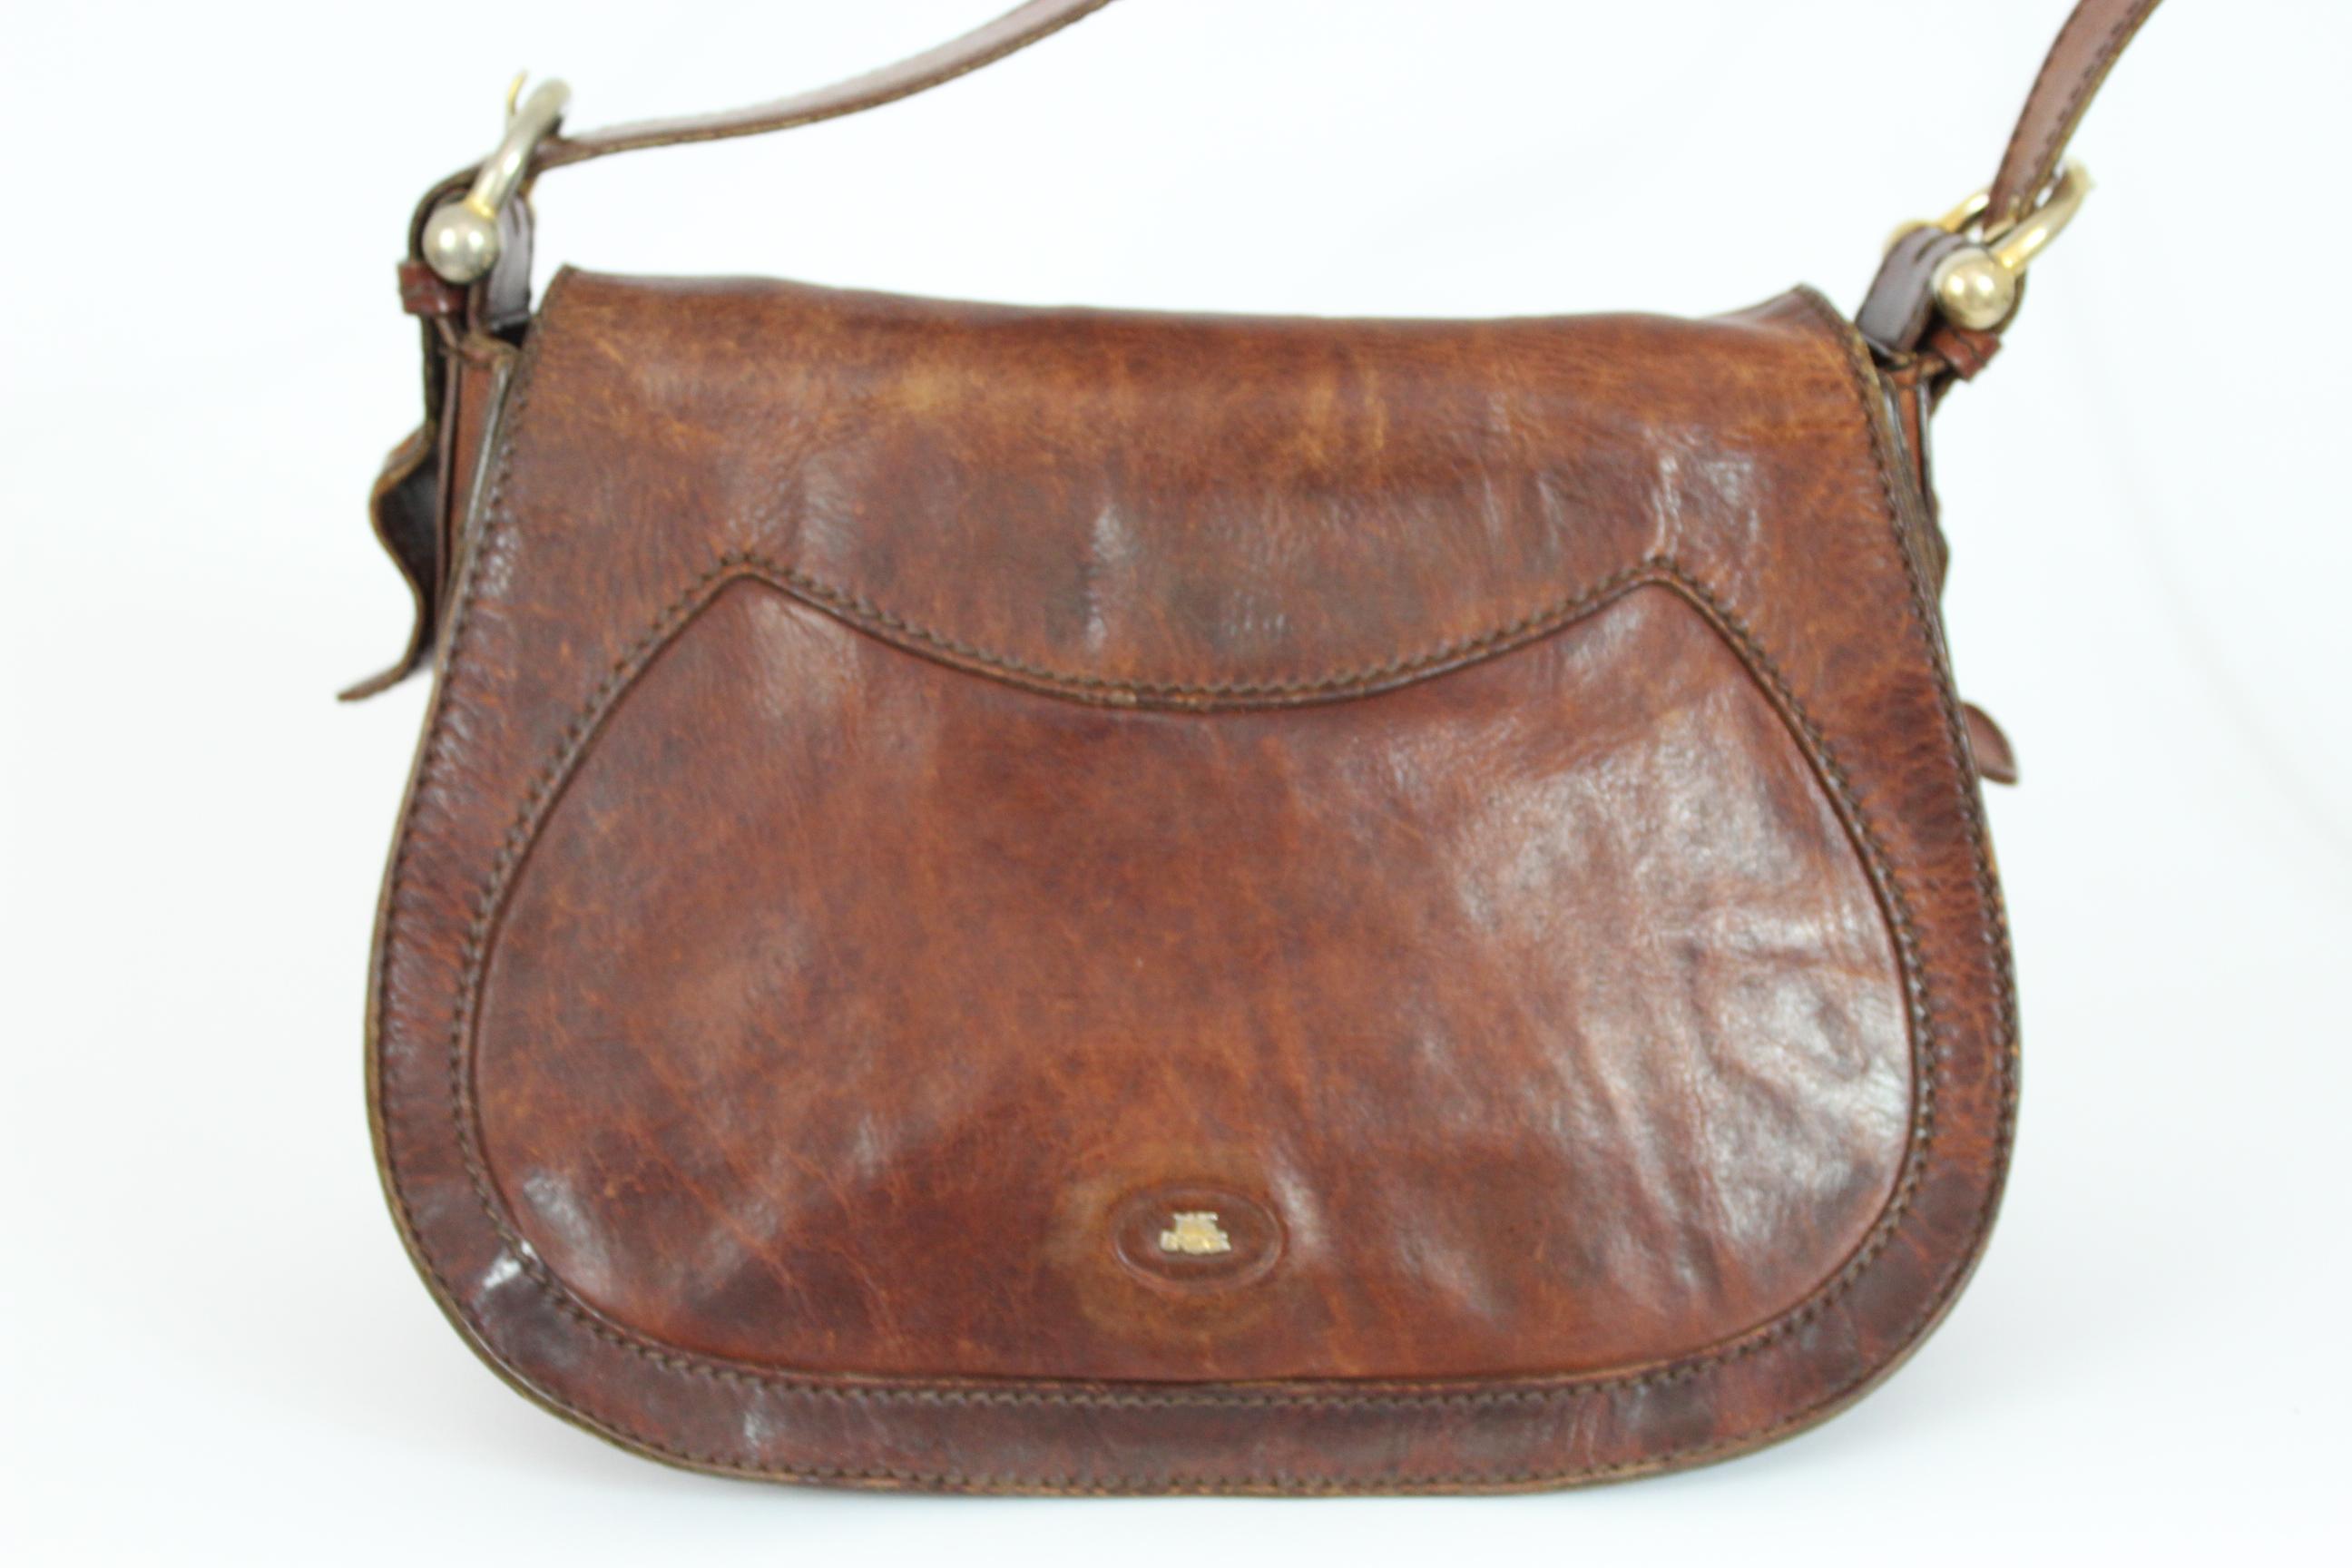 The Bridge vintage shoulder bag saddle model. Brown leather with adjustable shoulder strap. Front opening with magnetic clip, large zip pocket behind. Golden metallic details. Very spacious, logoed interior with zip pocket and cell phone